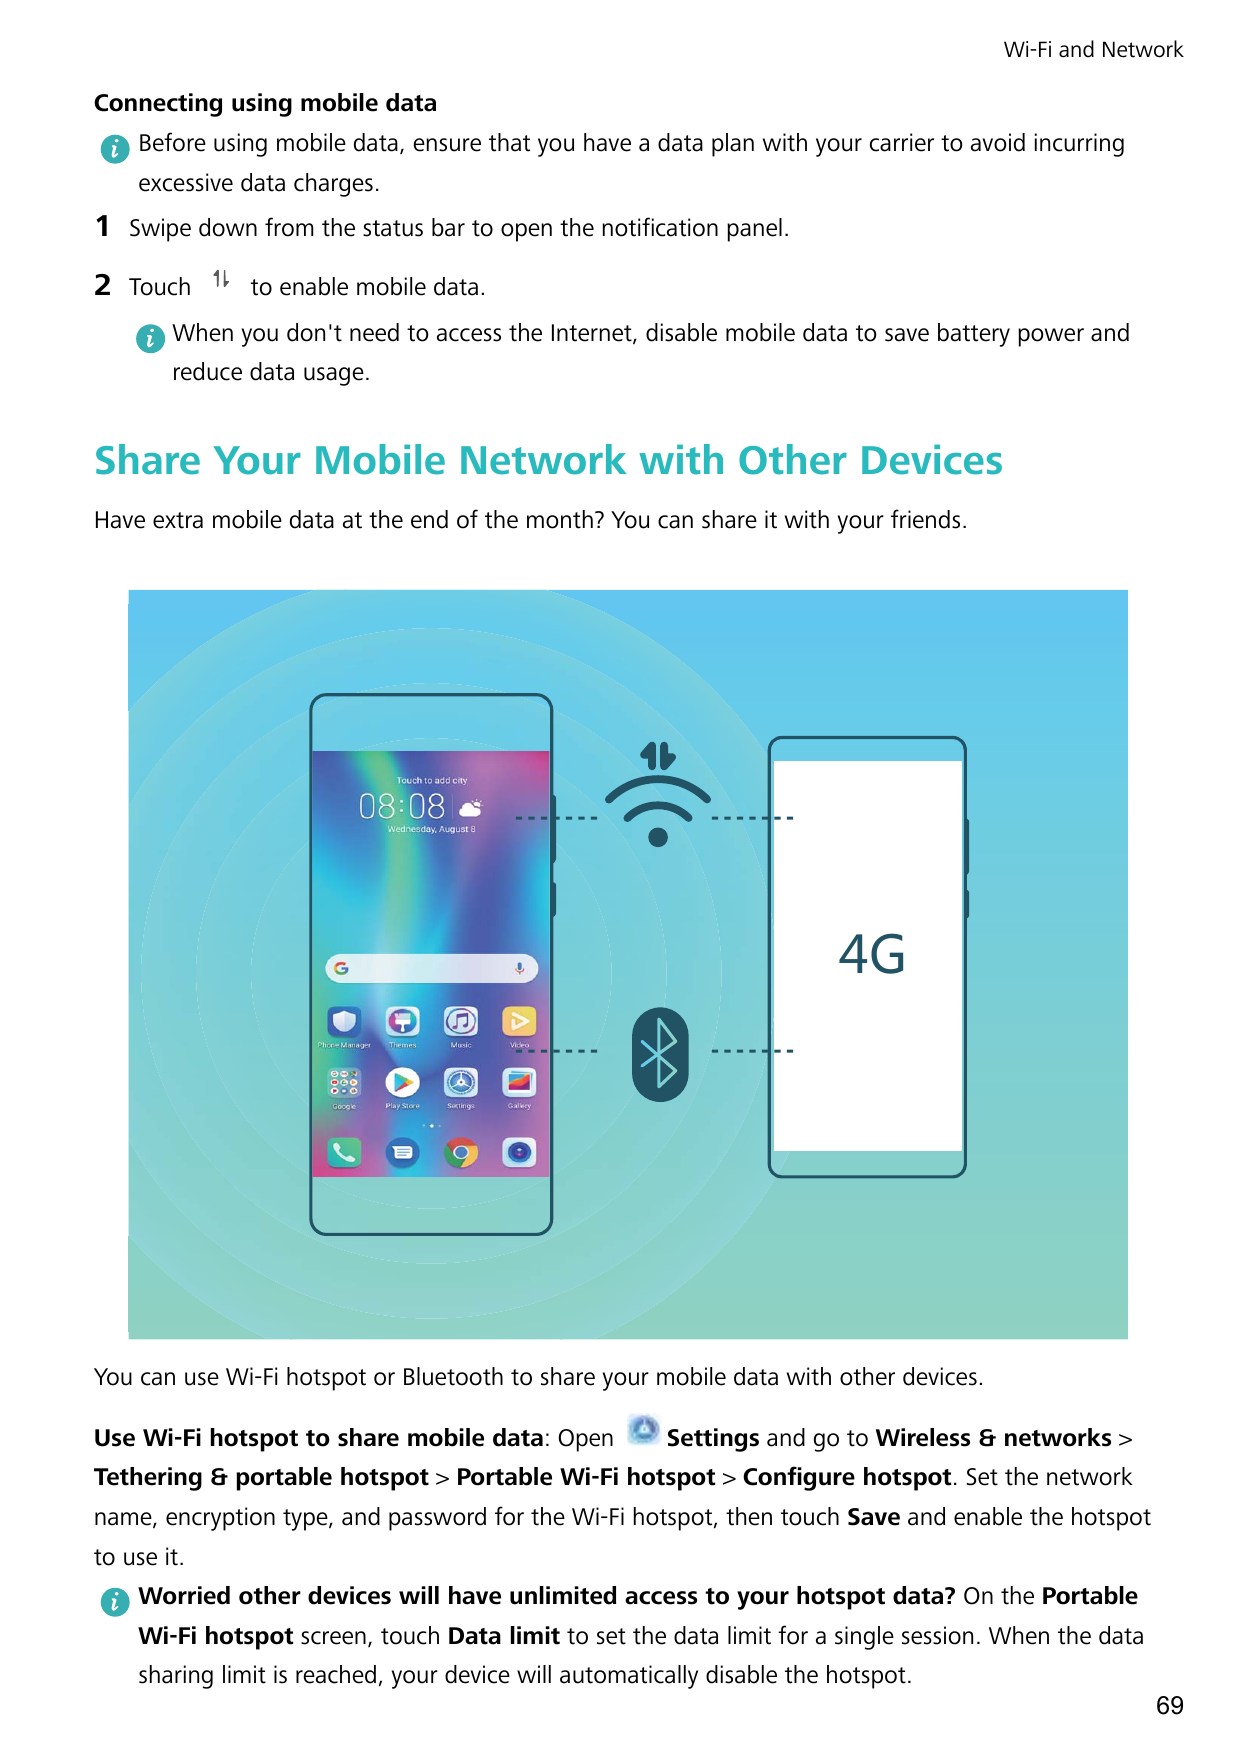 Wi-Fi and NetworkConnecting using mobile dataBefore using mobile data, ensure that you have a data plan with your carrier to avo